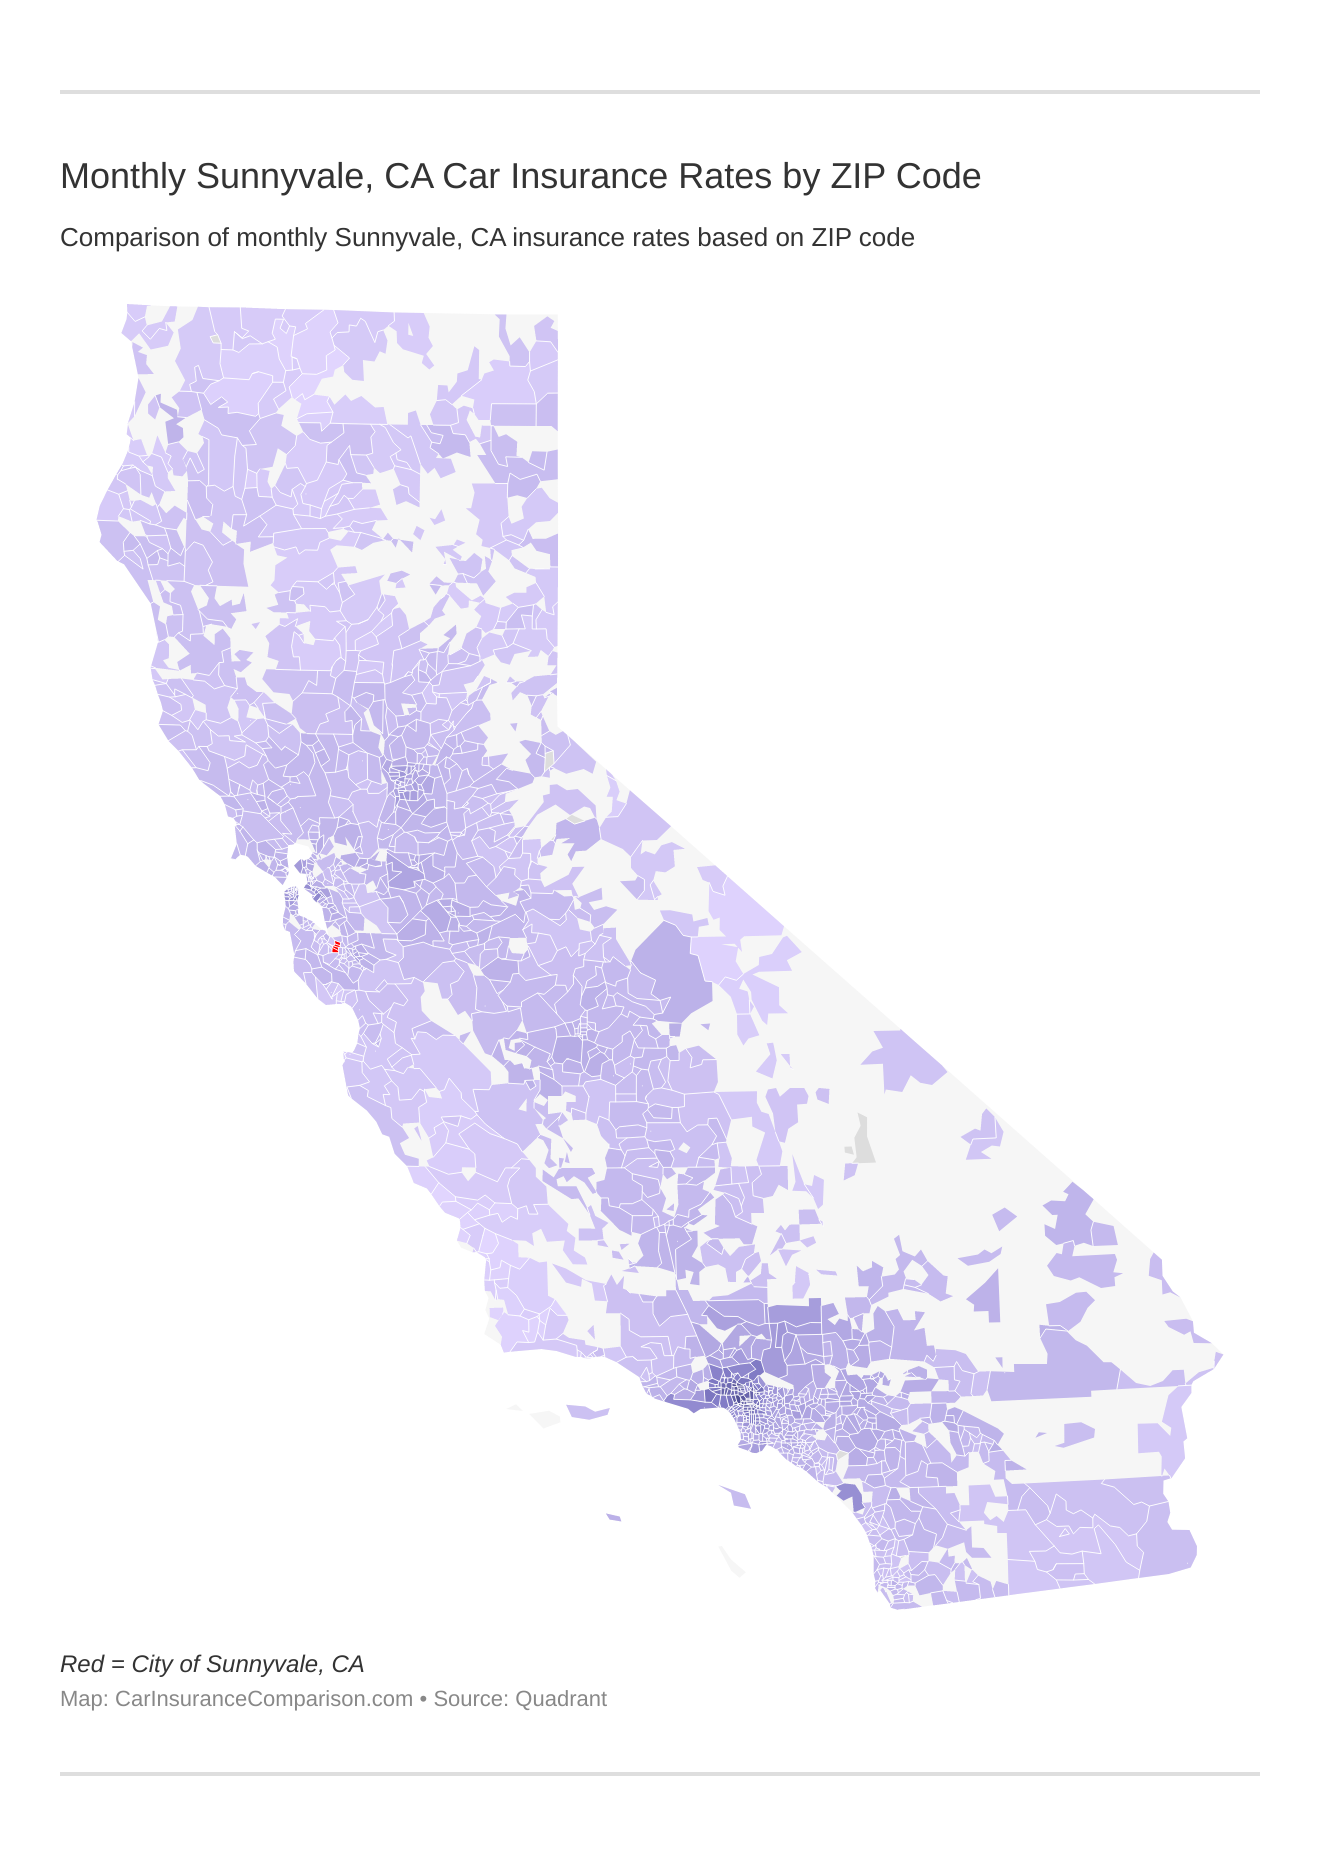 Monthly Sunnyvale, CA Car Insurance Rates by ZIP Code